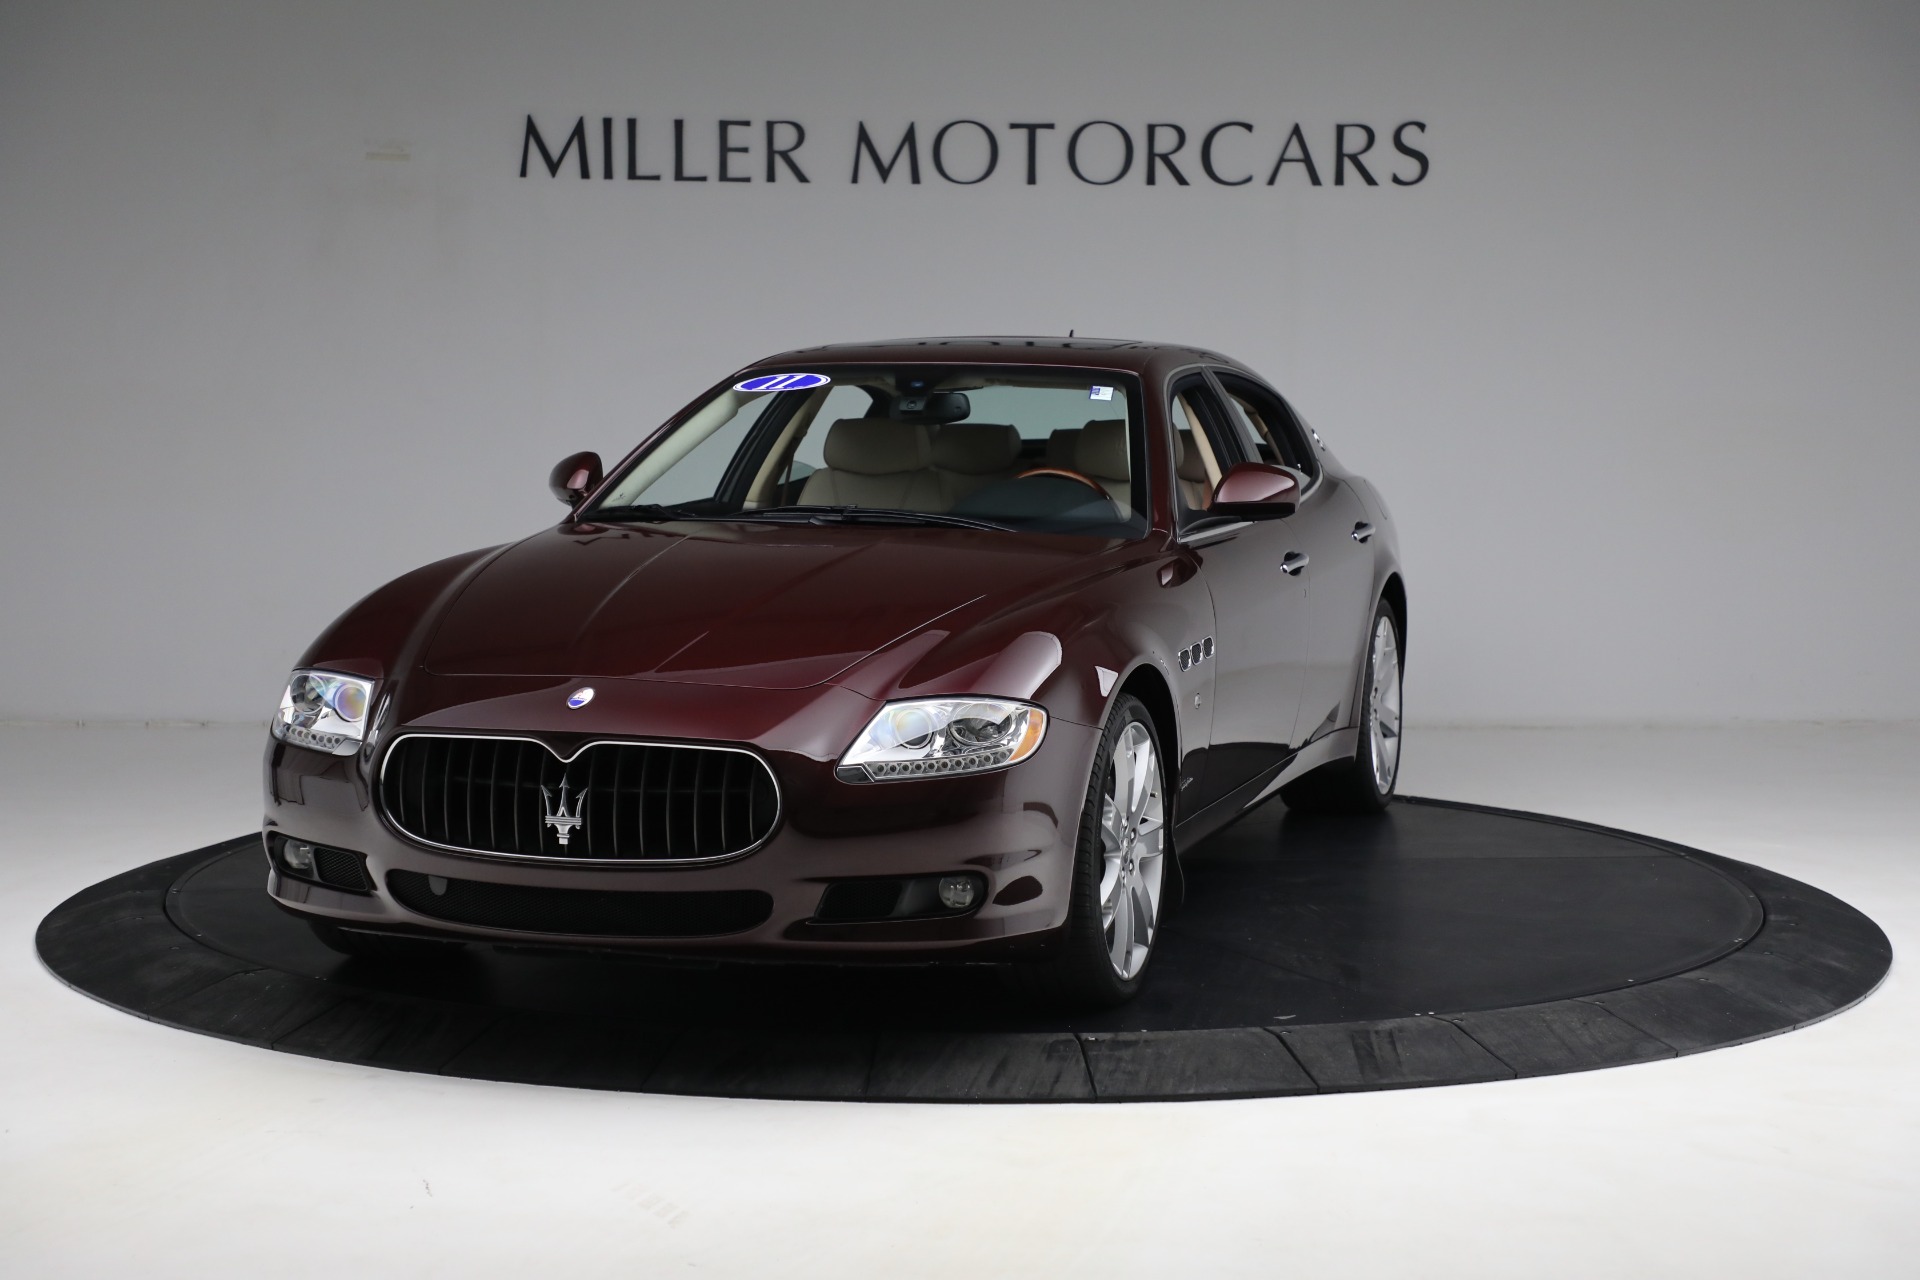 Used 2011 Maserati Quattroporte for sale Sold at Bentley Greenwich in Greenwich CT 06830 1